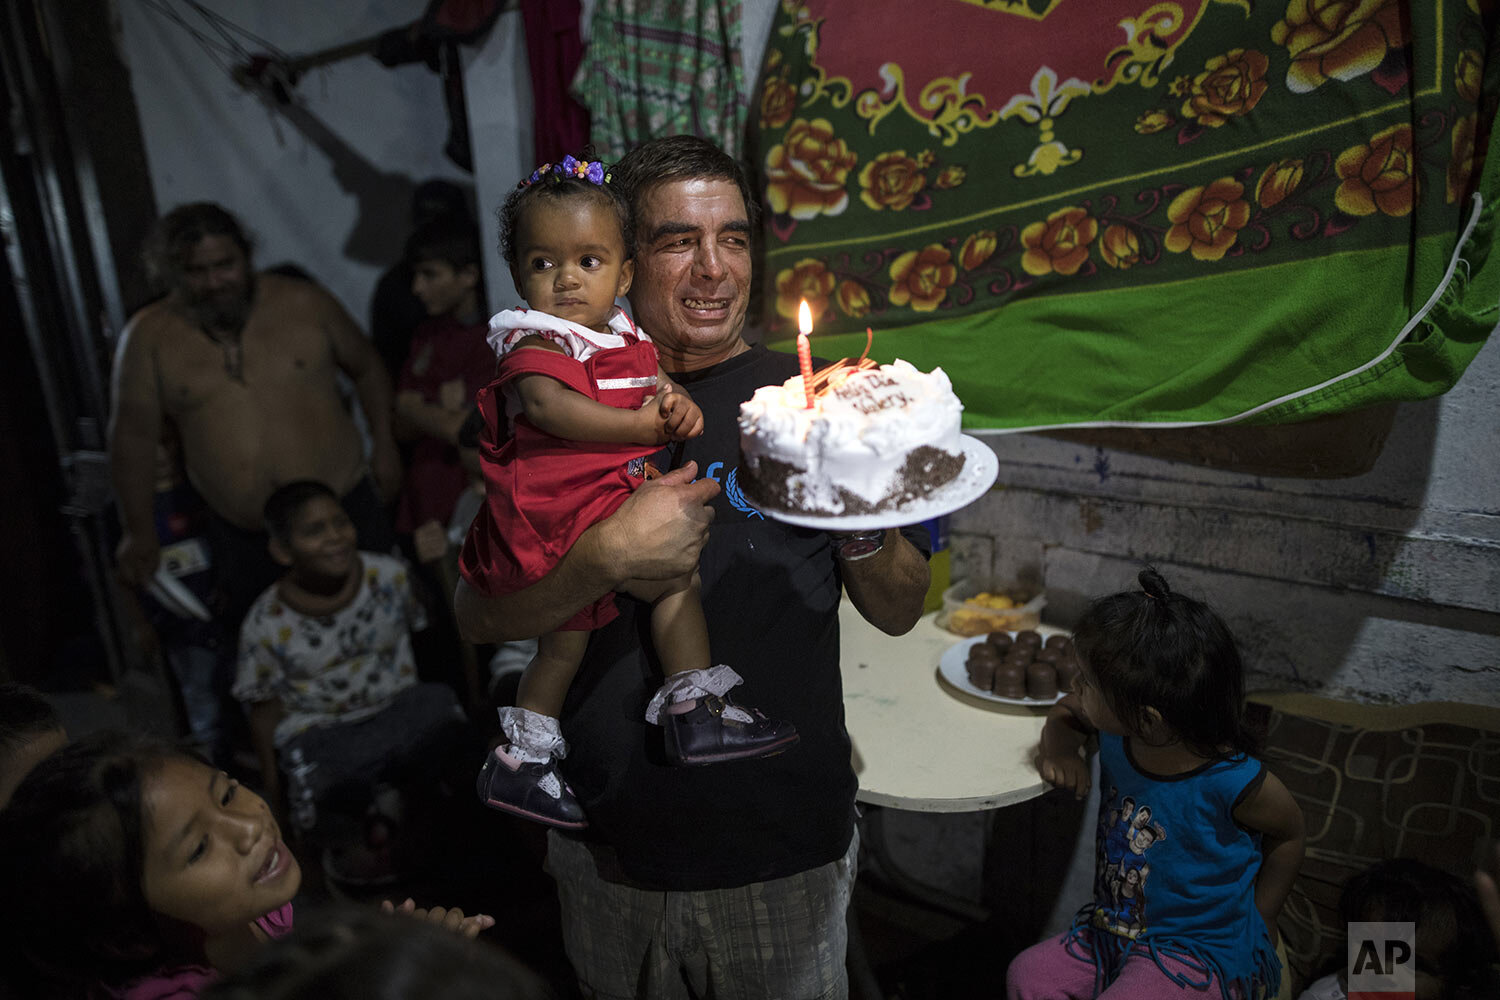  In this March 18, 2020 photo, Cesar Alegre carries his daughter Valerie while holding her store bought cake, as he and fellow residents prepare to mark her first birthday in the deteriorating building where they live, nicknamed “Luriganchito,” after